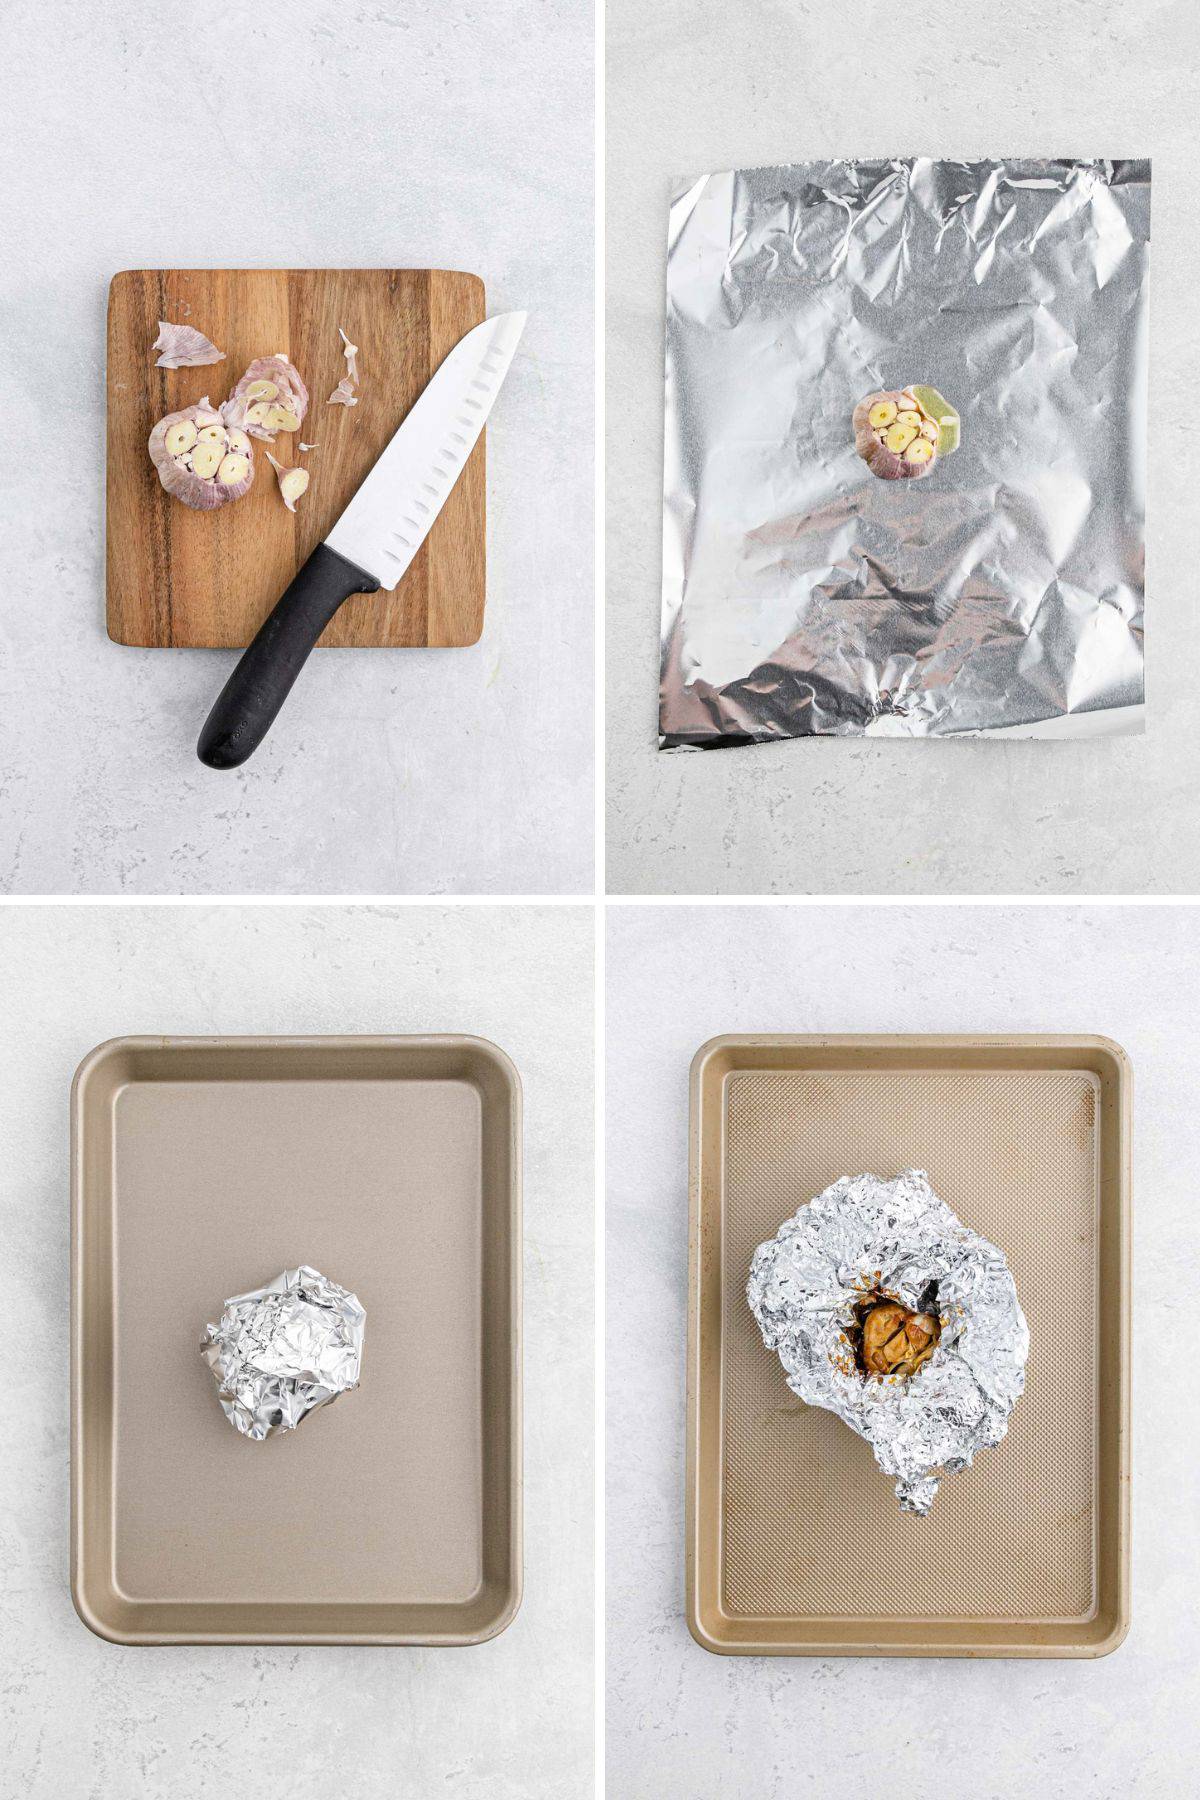 a collage of garlic being wrapped in foil and roasted to make a garlic mashed potato recipe